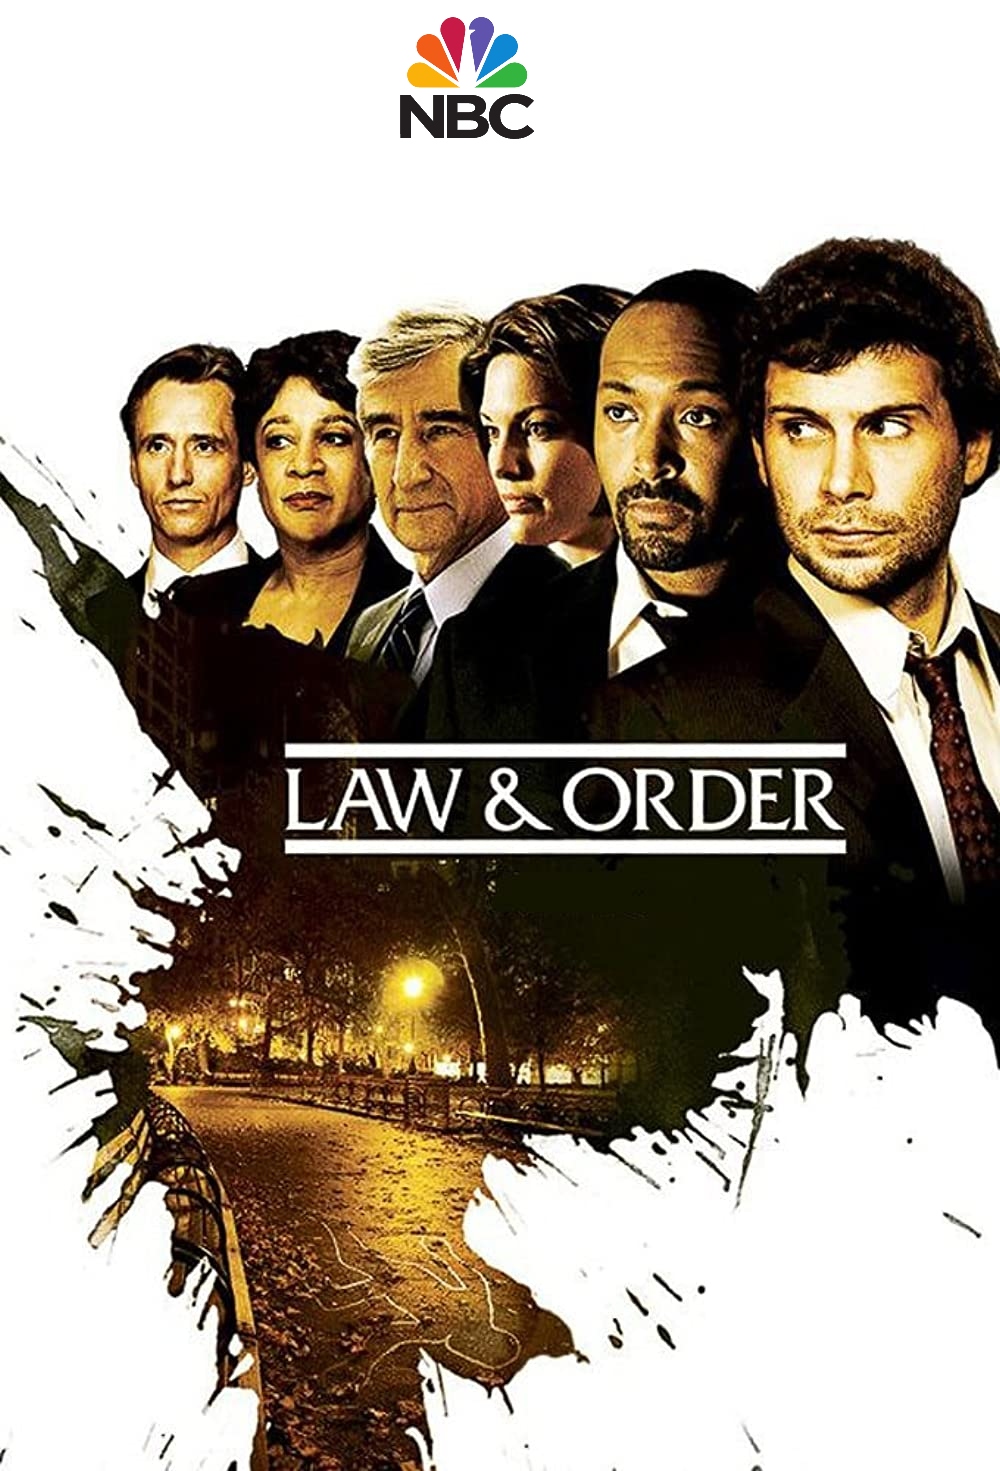 Where to stream the new episodes of Law & Order Season 21 (2022)